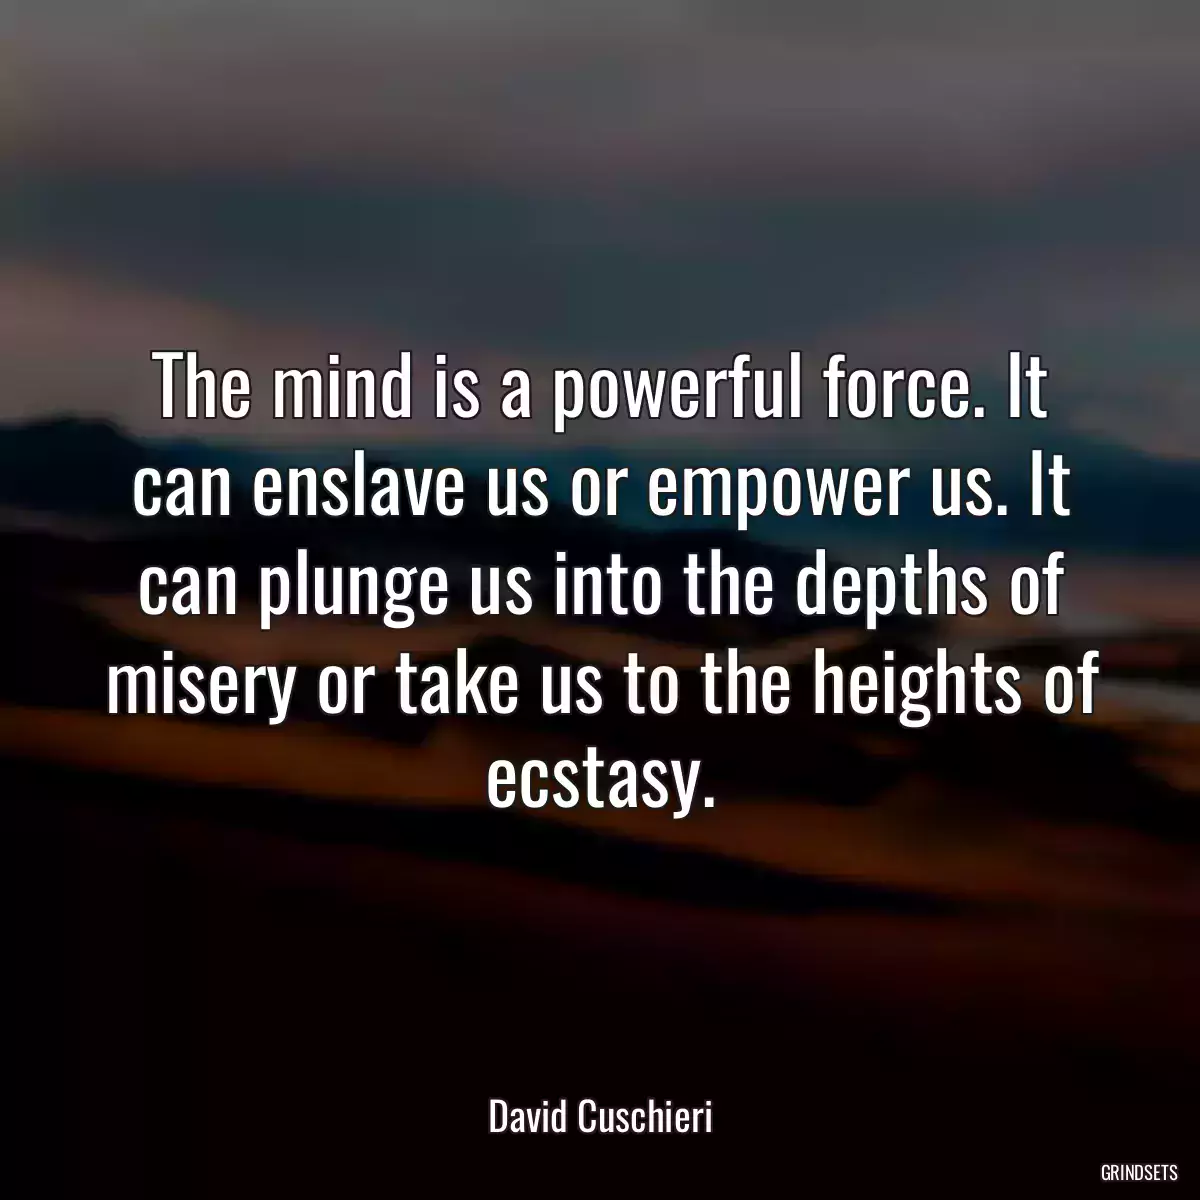 The mind is a powerful force. It can enslave us or empower us. It can plunge us into the depths of misery or take us to the heights of ecstasy.